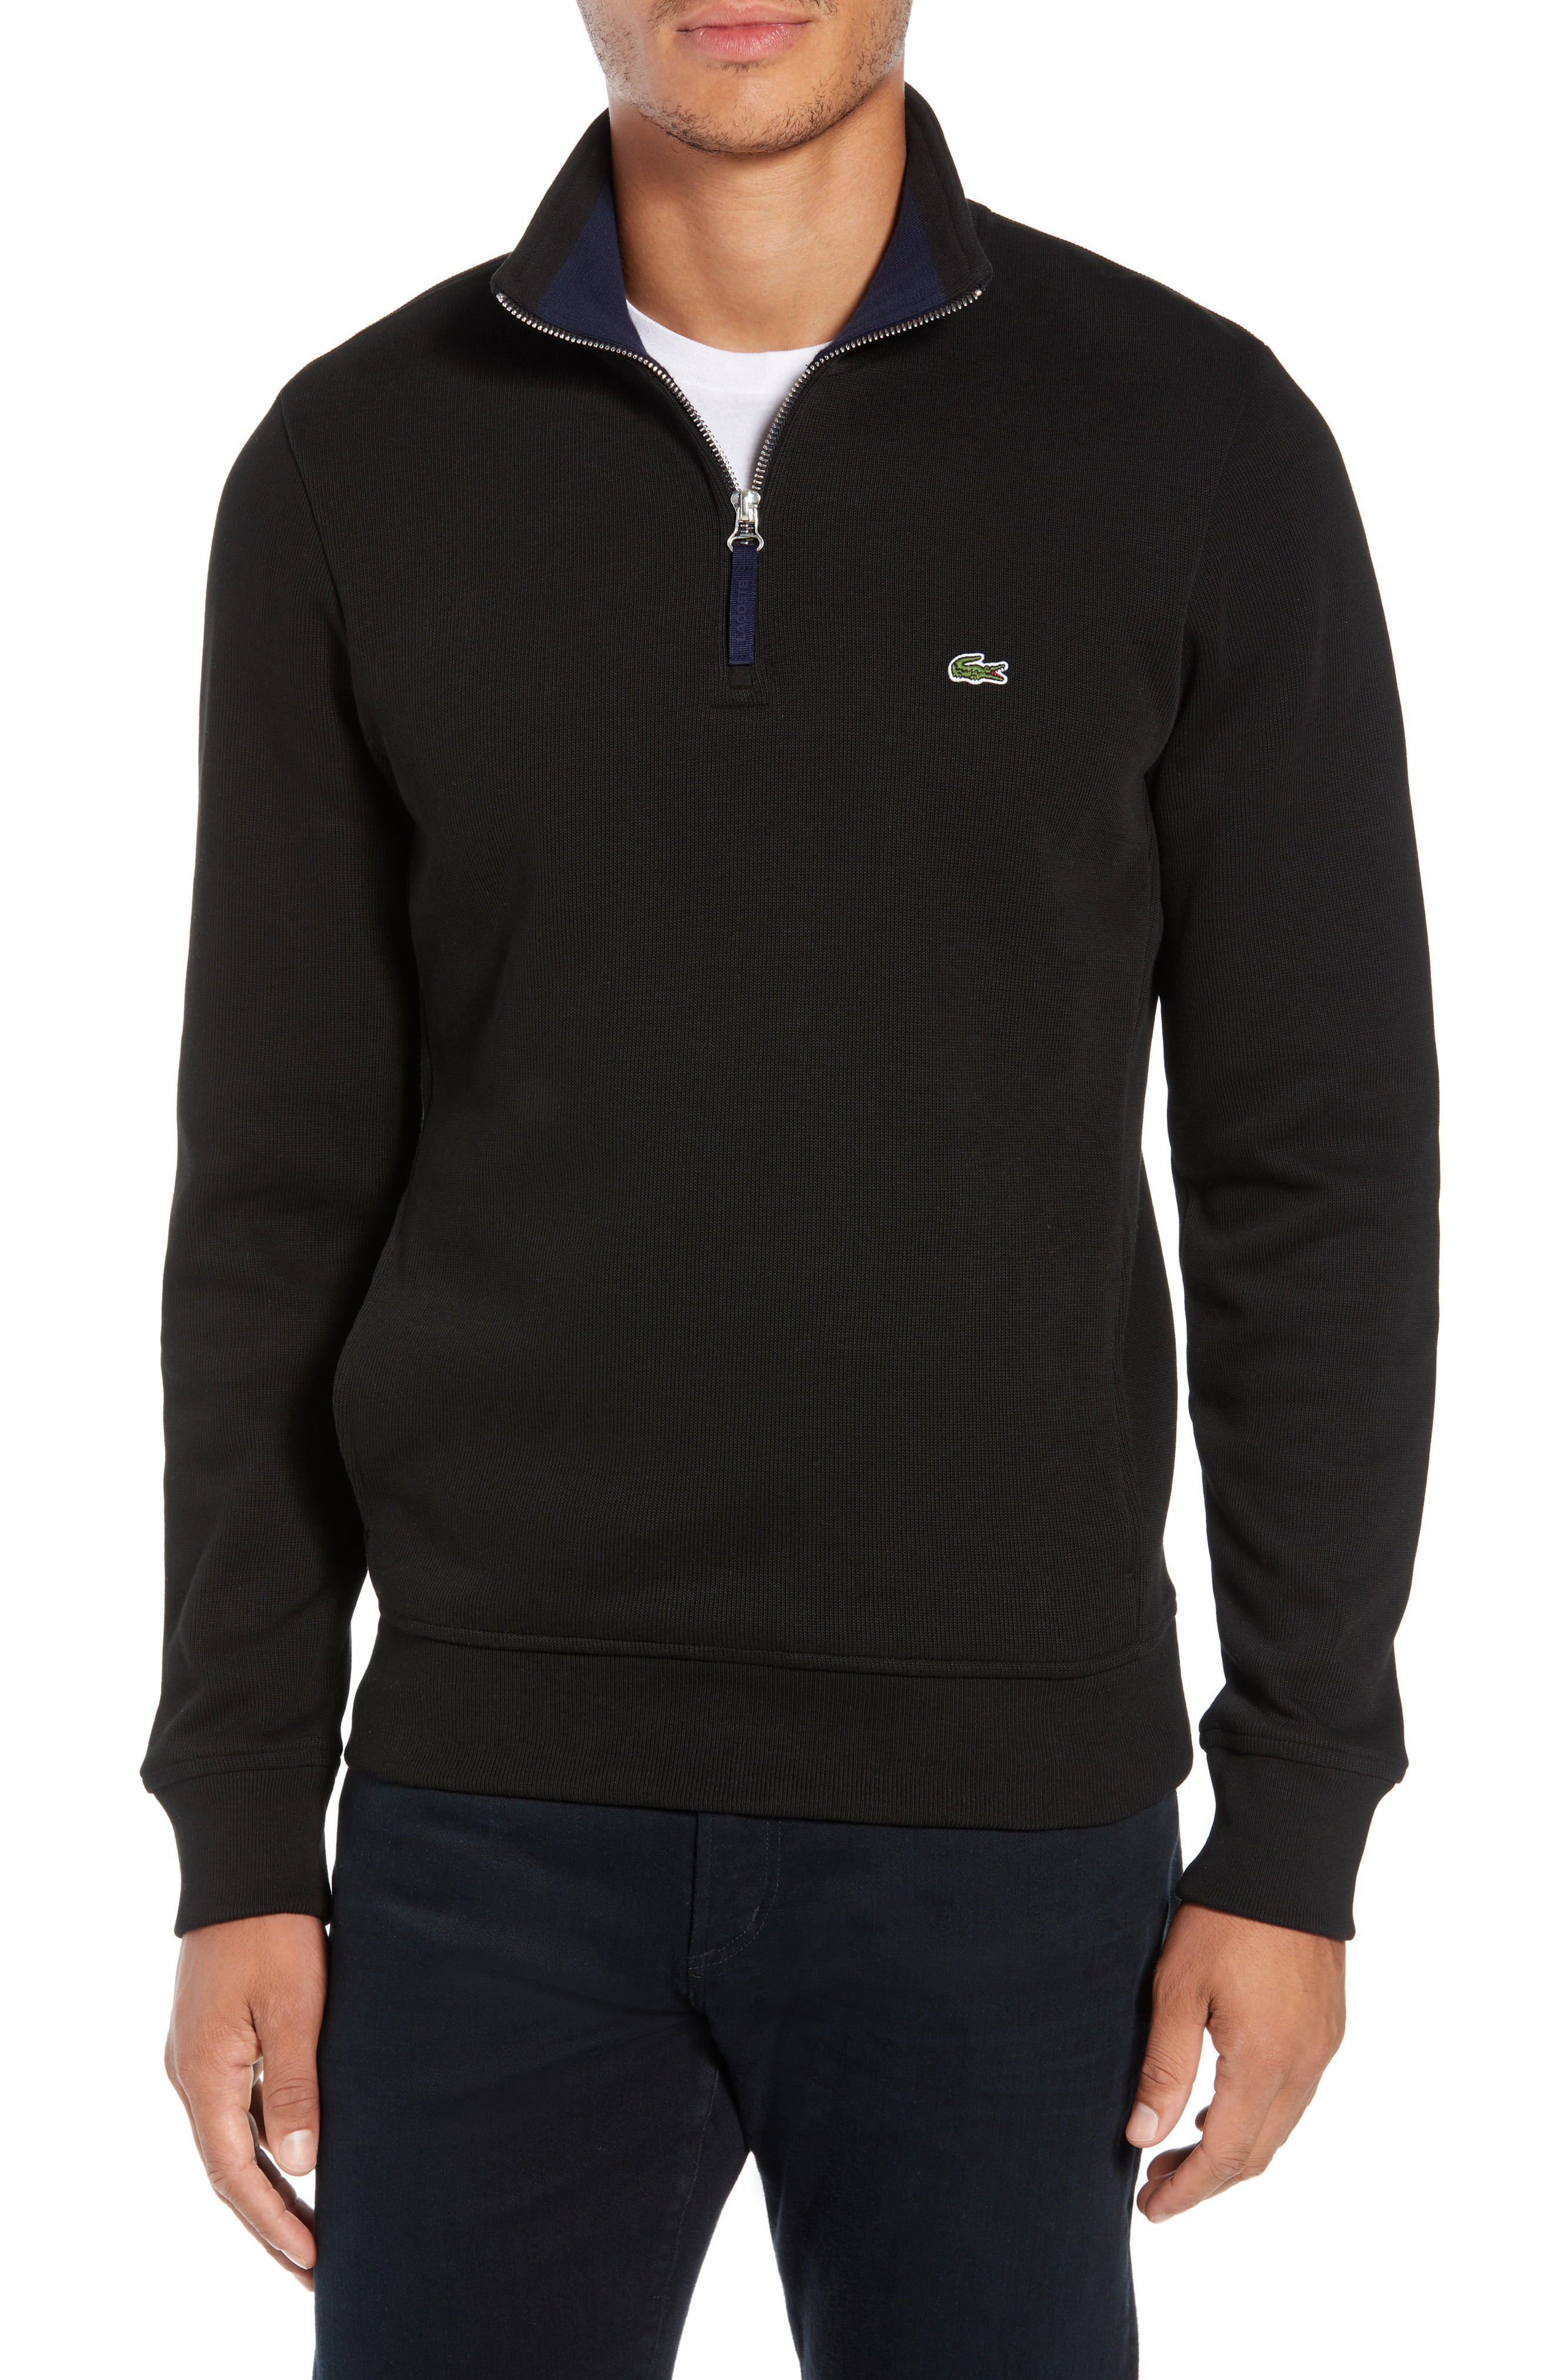 Lacoste Sweaters - Mens Sweater 1/2 Zip Mock-Neck Embroidered Logo XL ...